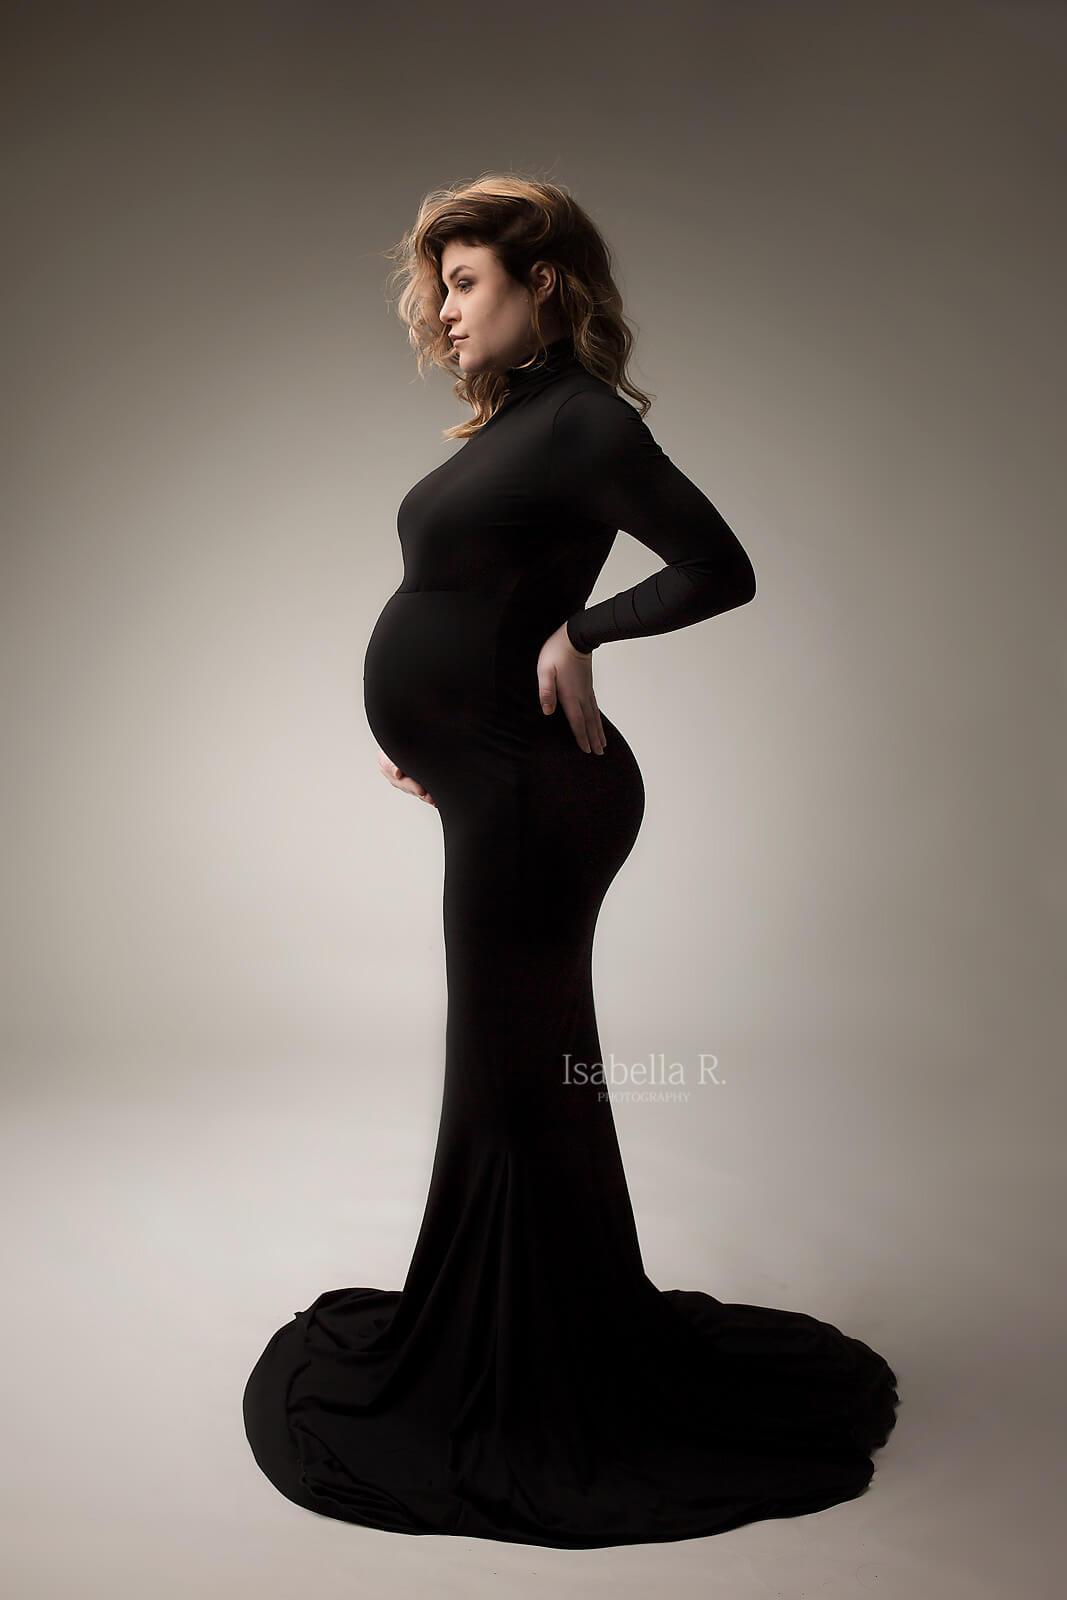 Short haired model poses on her side in a studio during a maternity photo session. She holds her back with one hand and her bump with the other. She wears a long and tight dress featuring turtle neck and long sleeves. Her eyes are open and she looks away. 